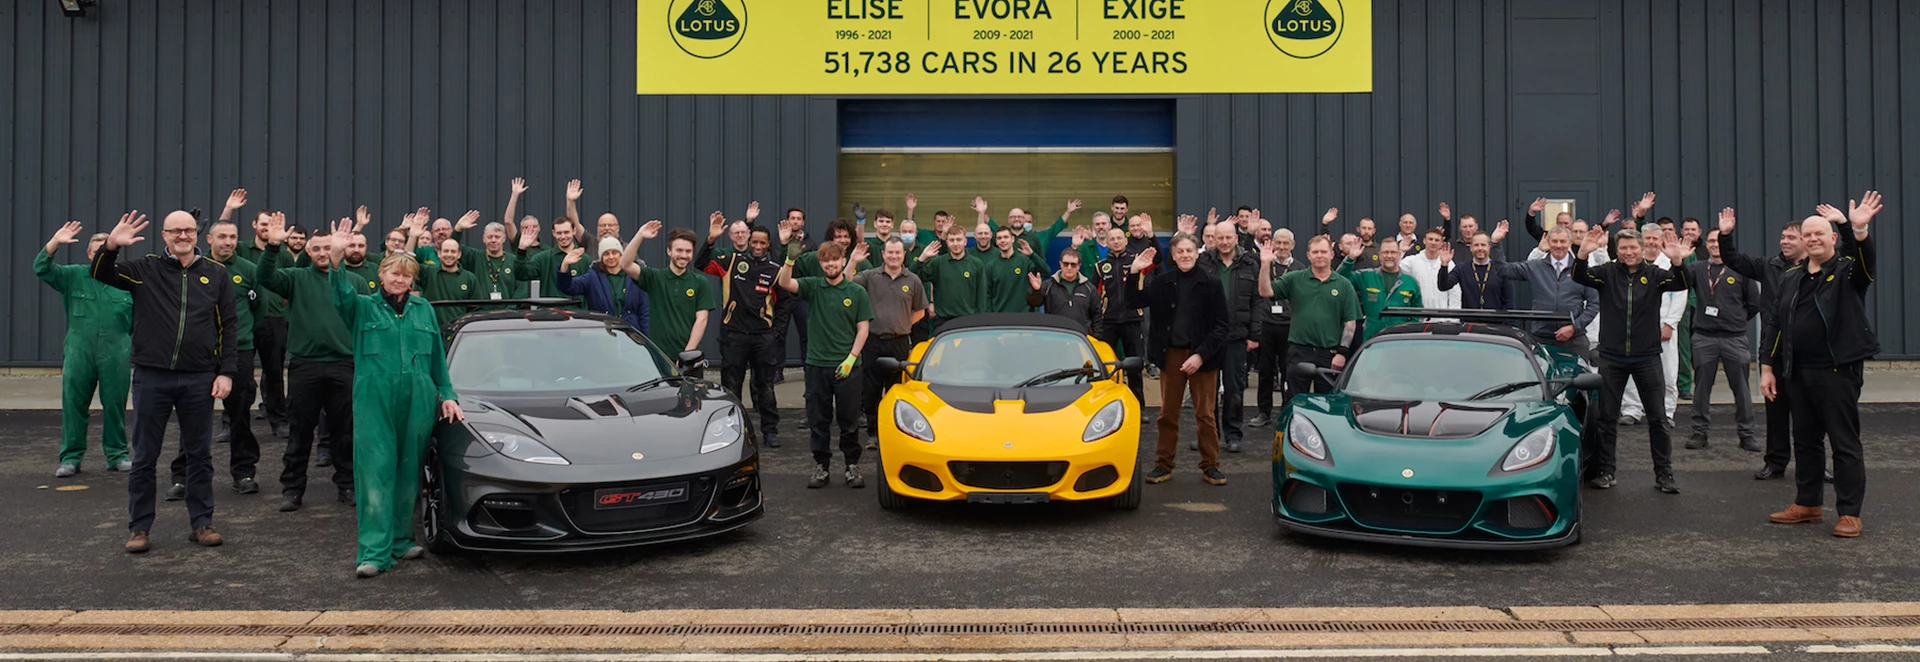 End of an era at Lotus as production ends of Elise, Exige and Evora 